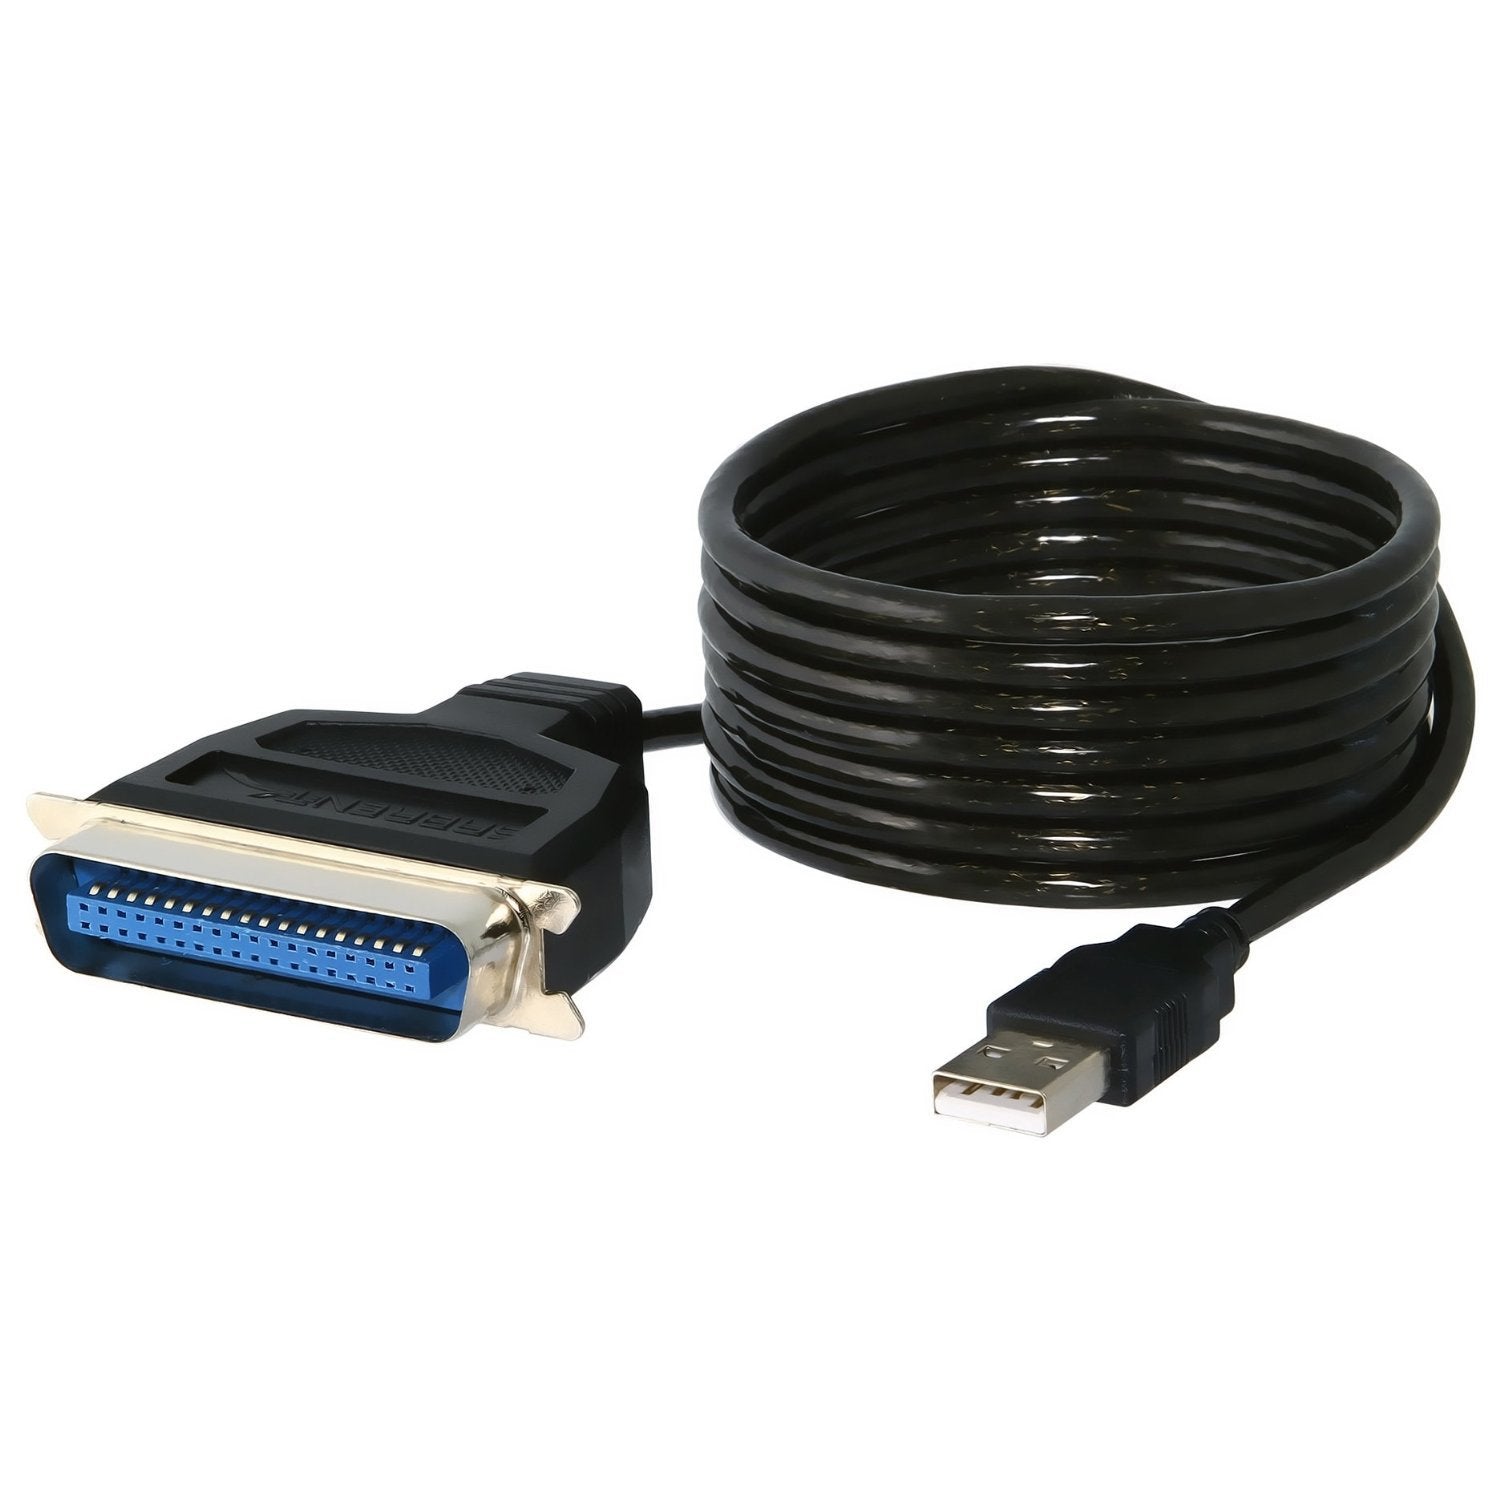 Emuler selvbiografi anklageren USB to Parallel IEEE 1284 Printer Cable Adapter - Sabrent